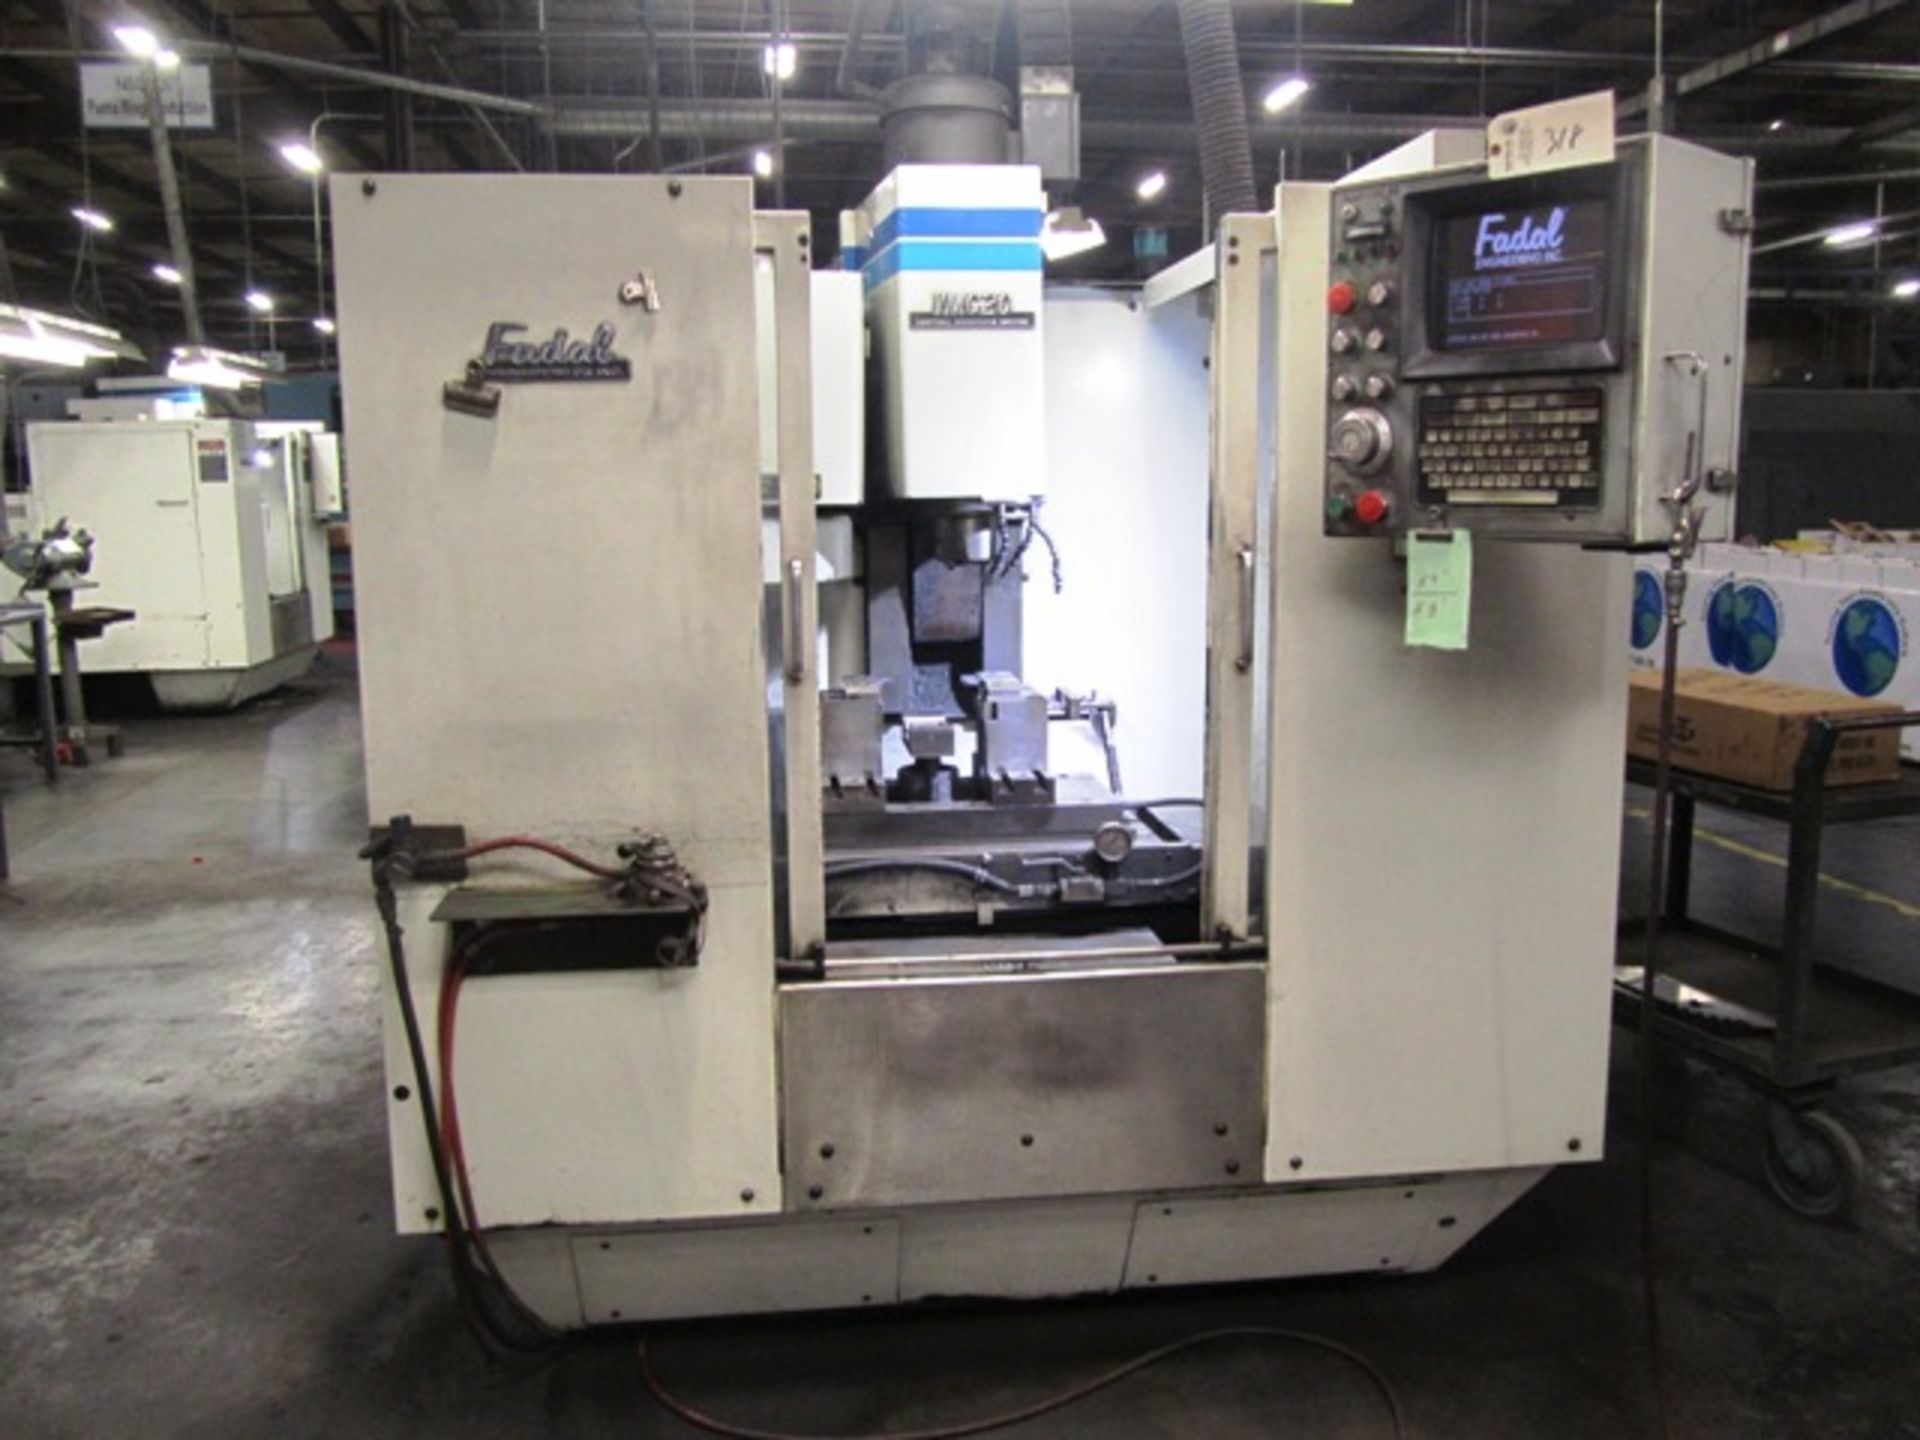 Fadal VMC 20 Vertical Milling Machine with 16 ATC, 16'' x 48'' Table, 40 Taper, Fadal CNC 88